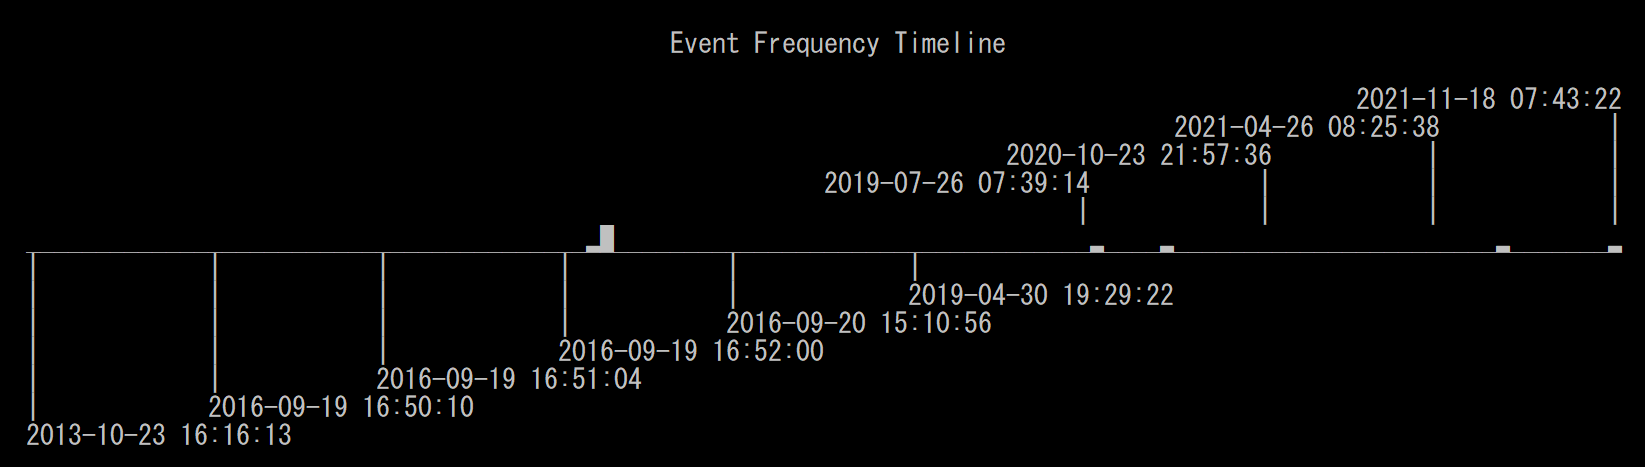 Hayabusa Event Frequency Timeline